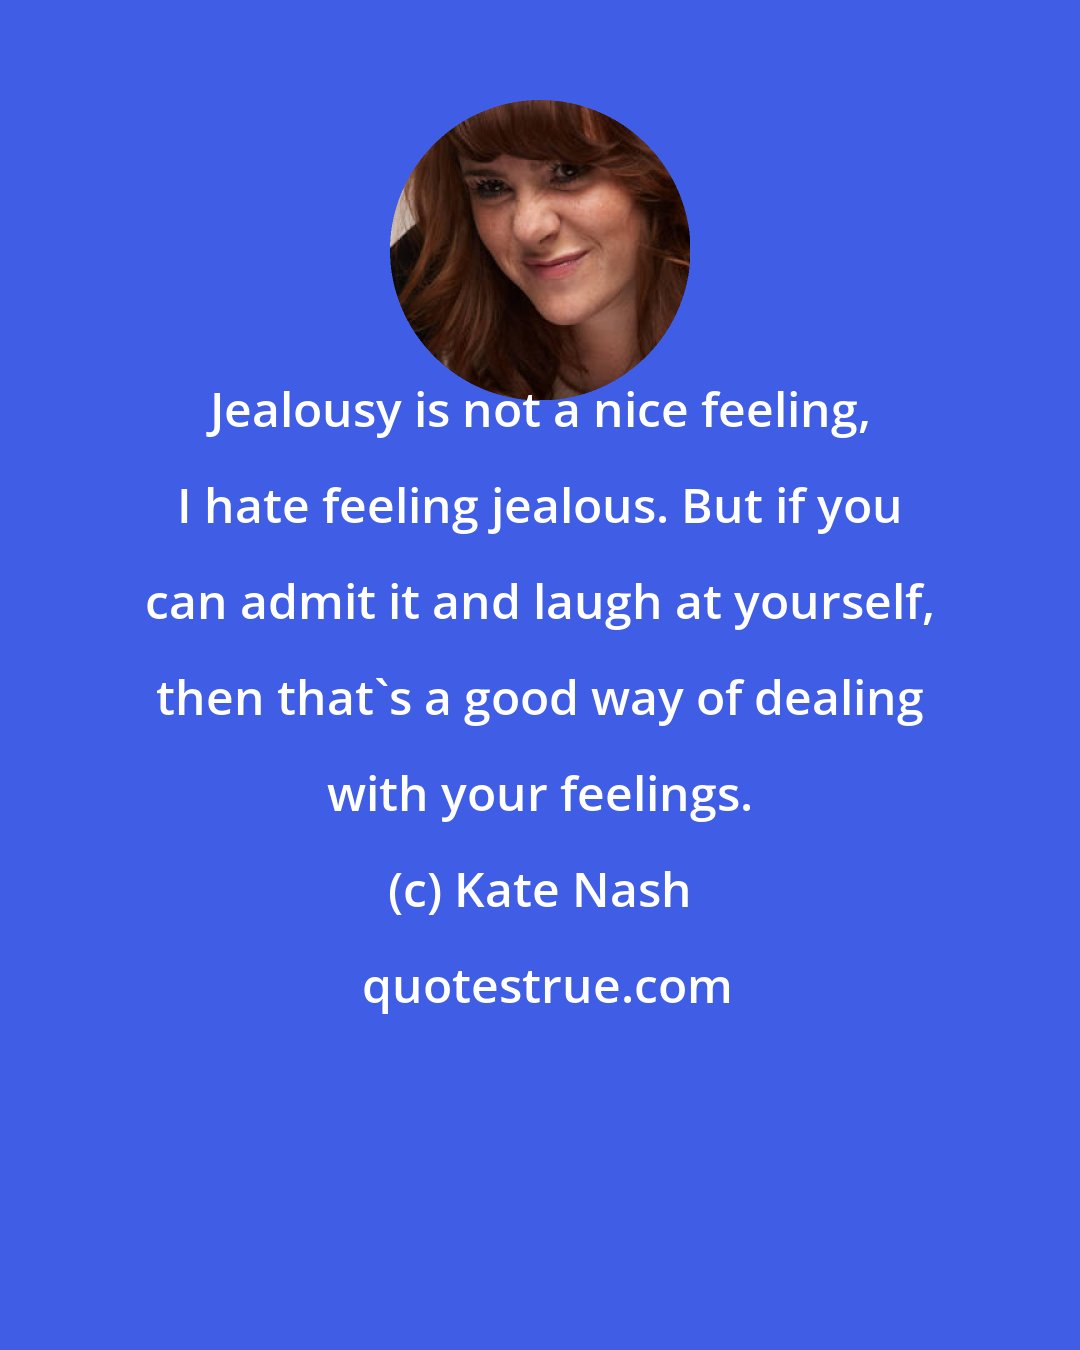 Kate Nash: Jealousy is not a nice feeling, I hate feeling jealous. But if you can admit it and laugh at yourself, then that's a good way of dealing with your feelings.